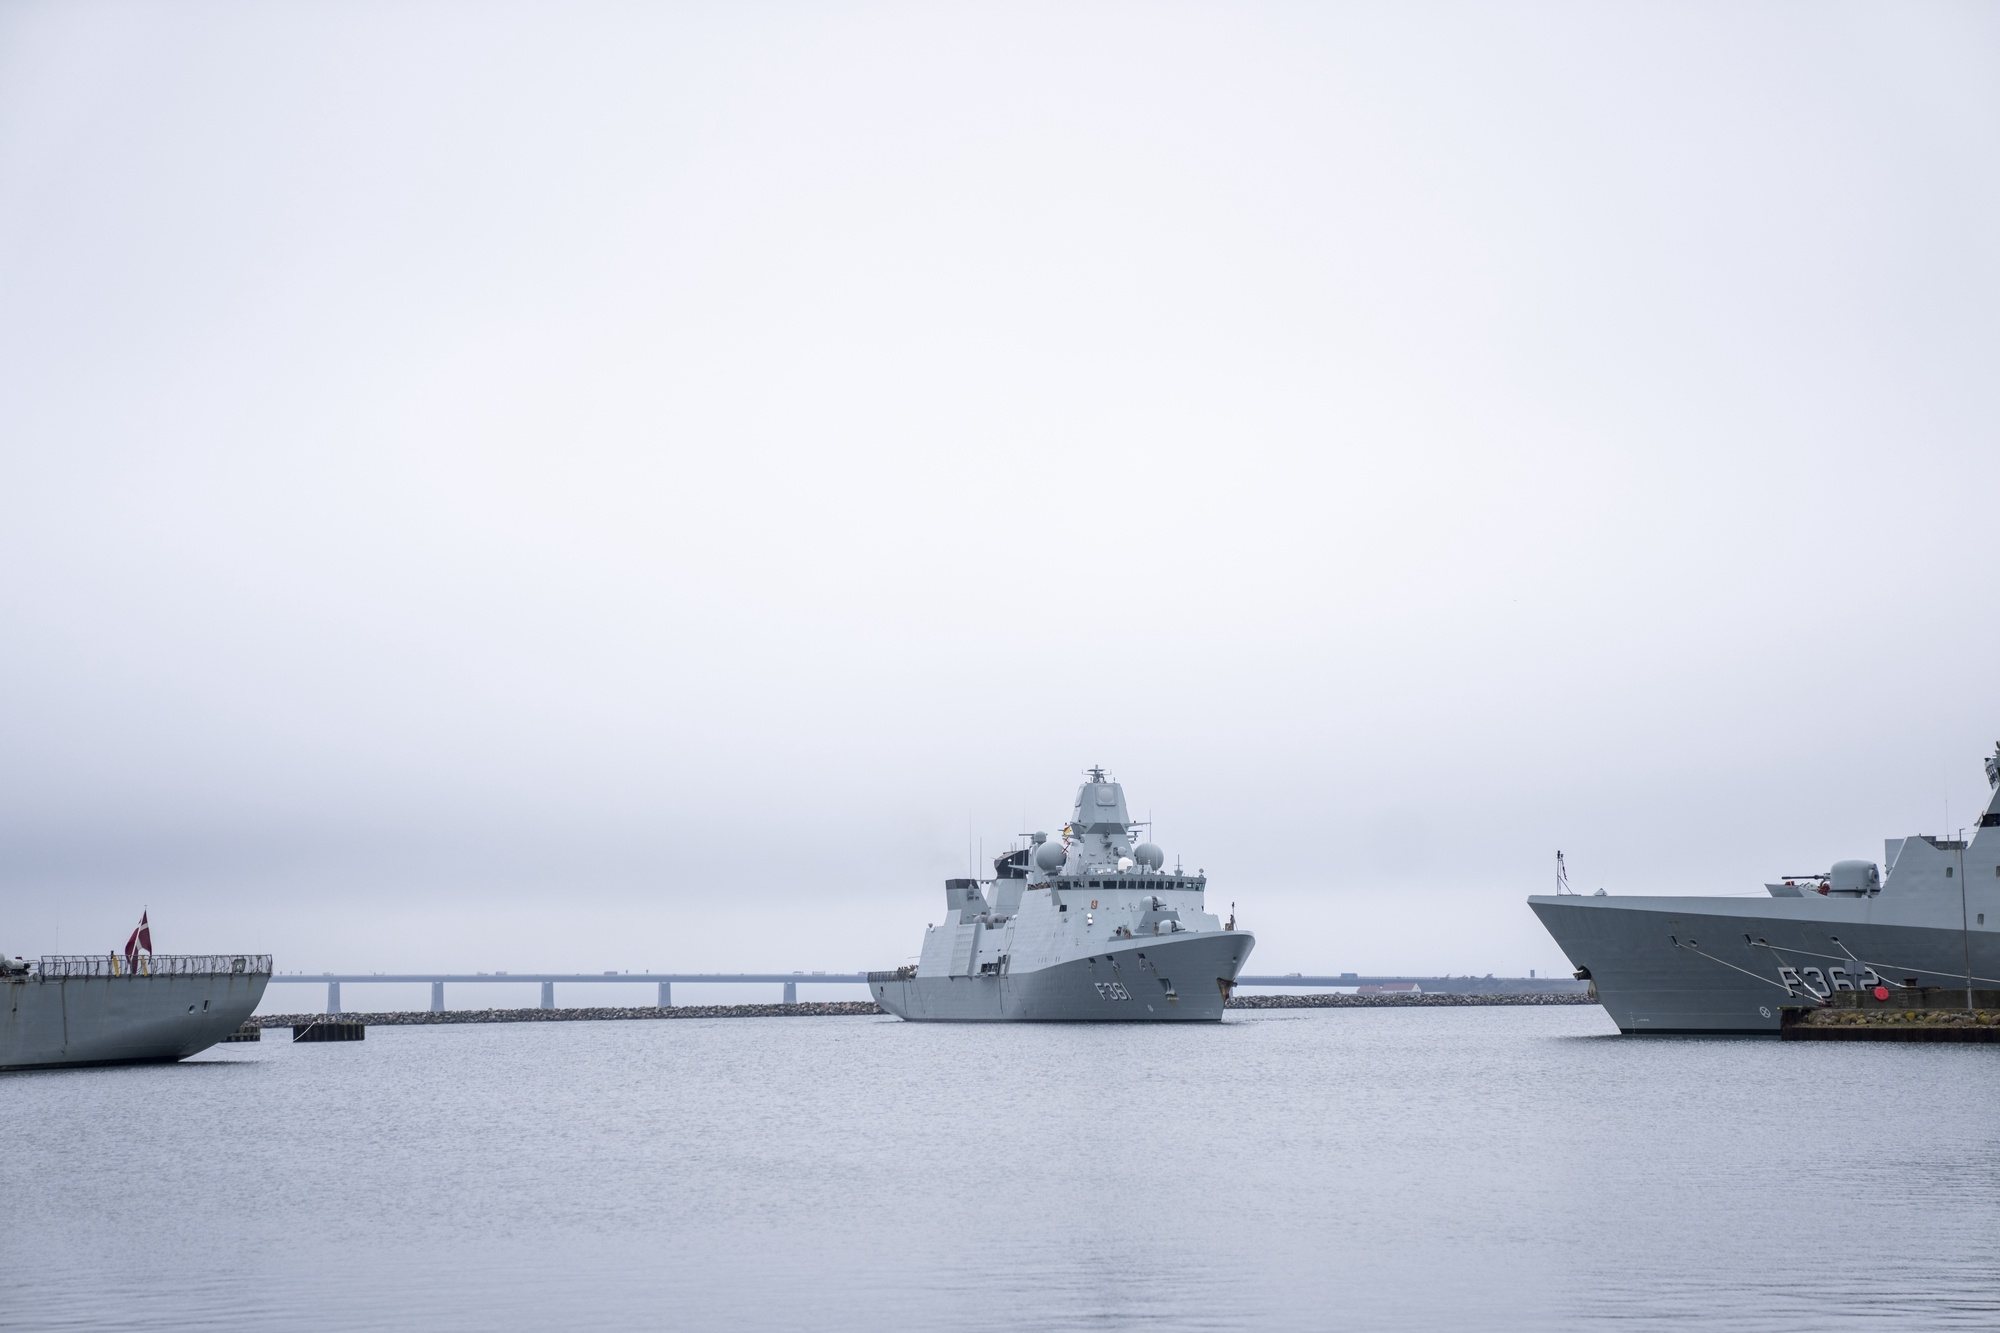 epa11258847 The frigate Iver Huitfeldt arrives at the base port at Naval Station Korsoer in Korsoer, Denmark, 04 April 2024. The Danish frigate Iver Huitfeldt has been deployed in the Red Sea as part of the international coalition Operation Prosperity Guardian since February 2024. The coalition&#039;s task is to protect civilian shipping against attacks from the Houthi movement in Yemen.  EPA/IDA MARIE ODGAARD DENMARK OUT